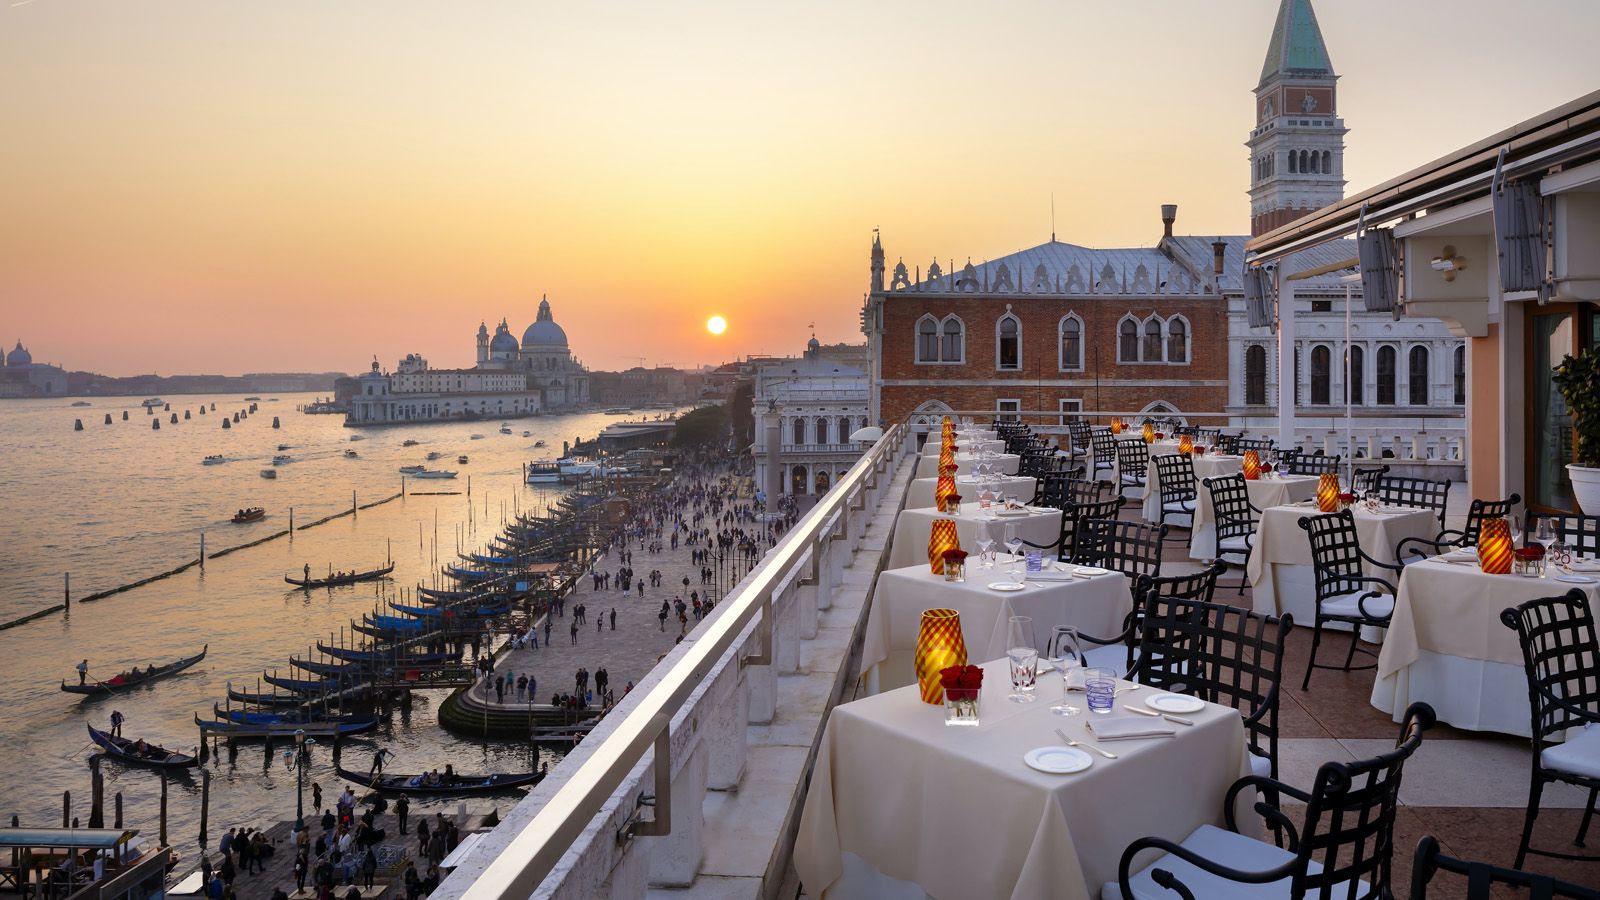 Luxury chain Four Seasons announces hotel in Venice, Italy